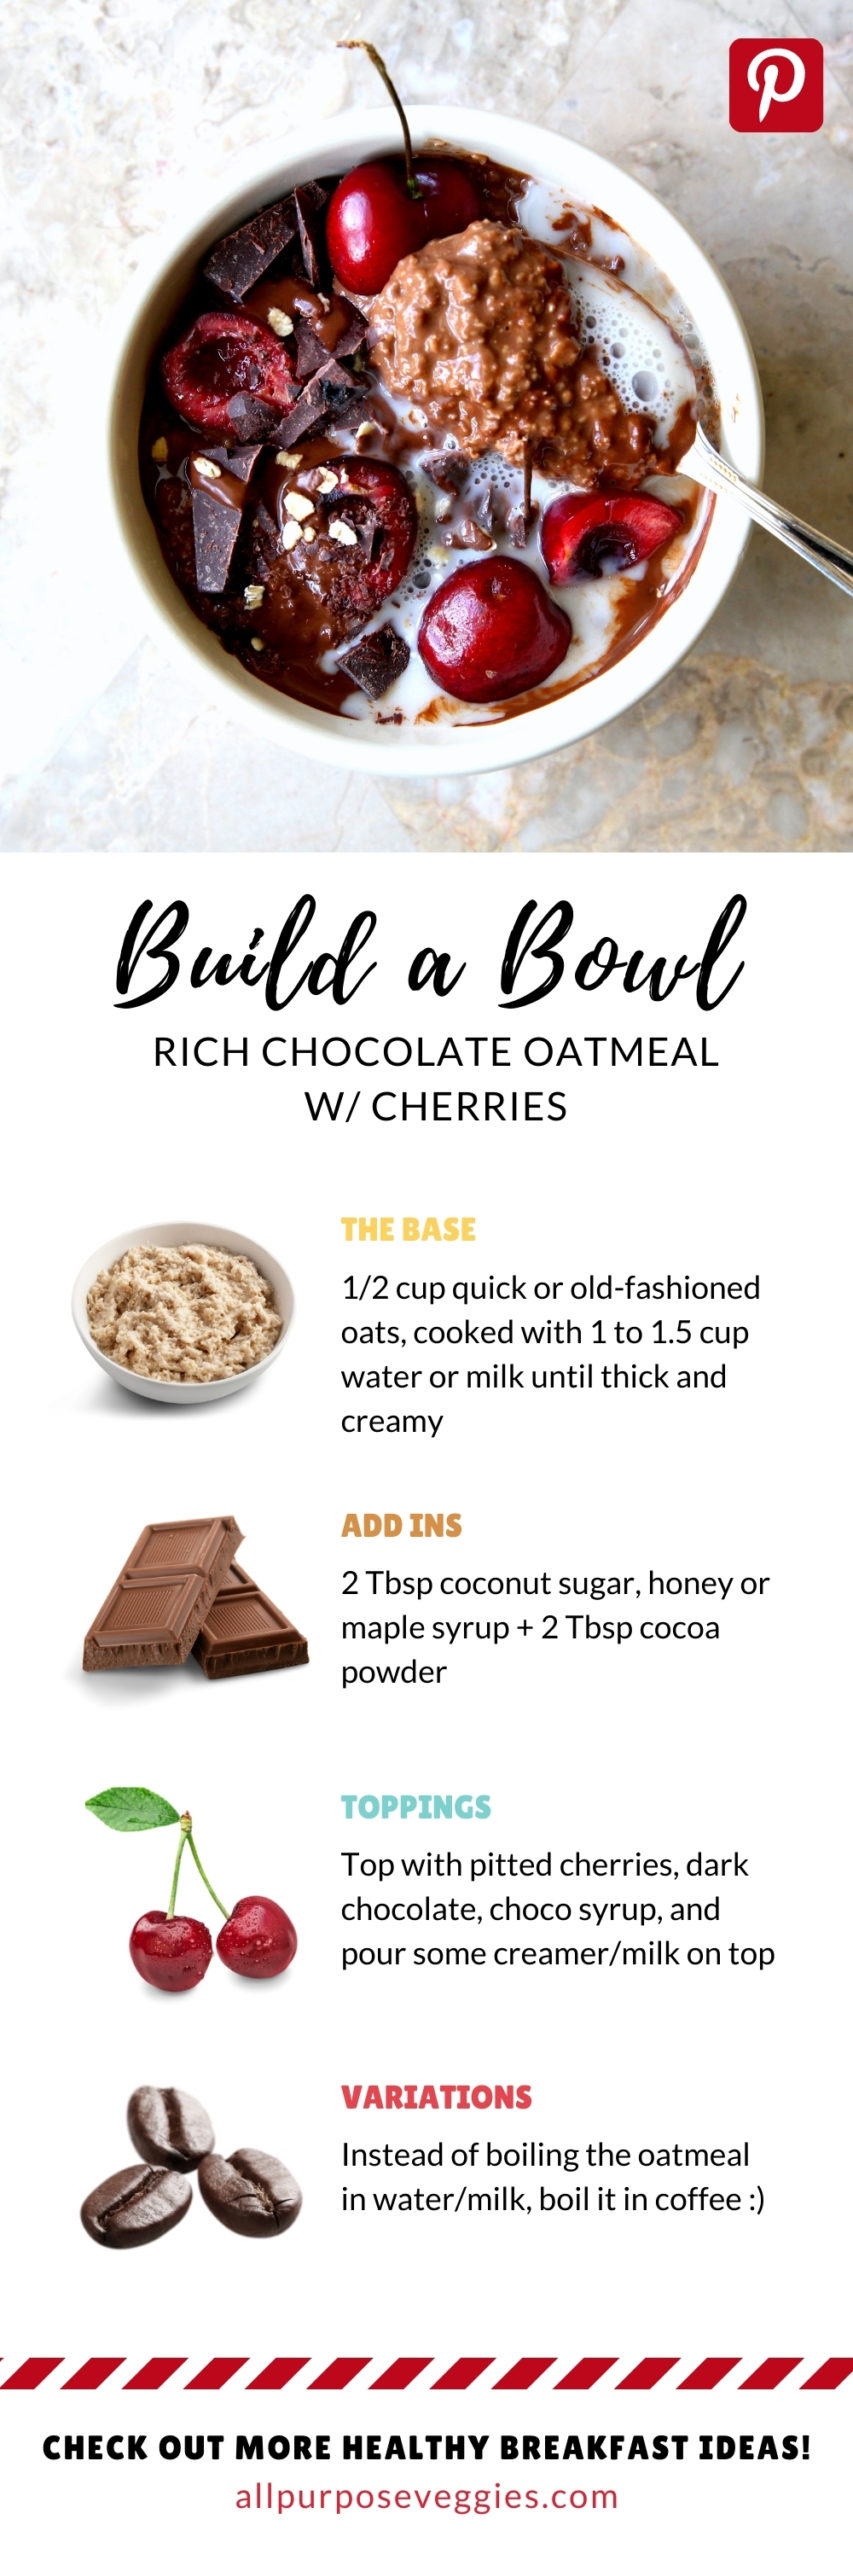 Quick Recipe Guide to Dark Chocolate Oatmeal with Cherries Breakfast Bowl